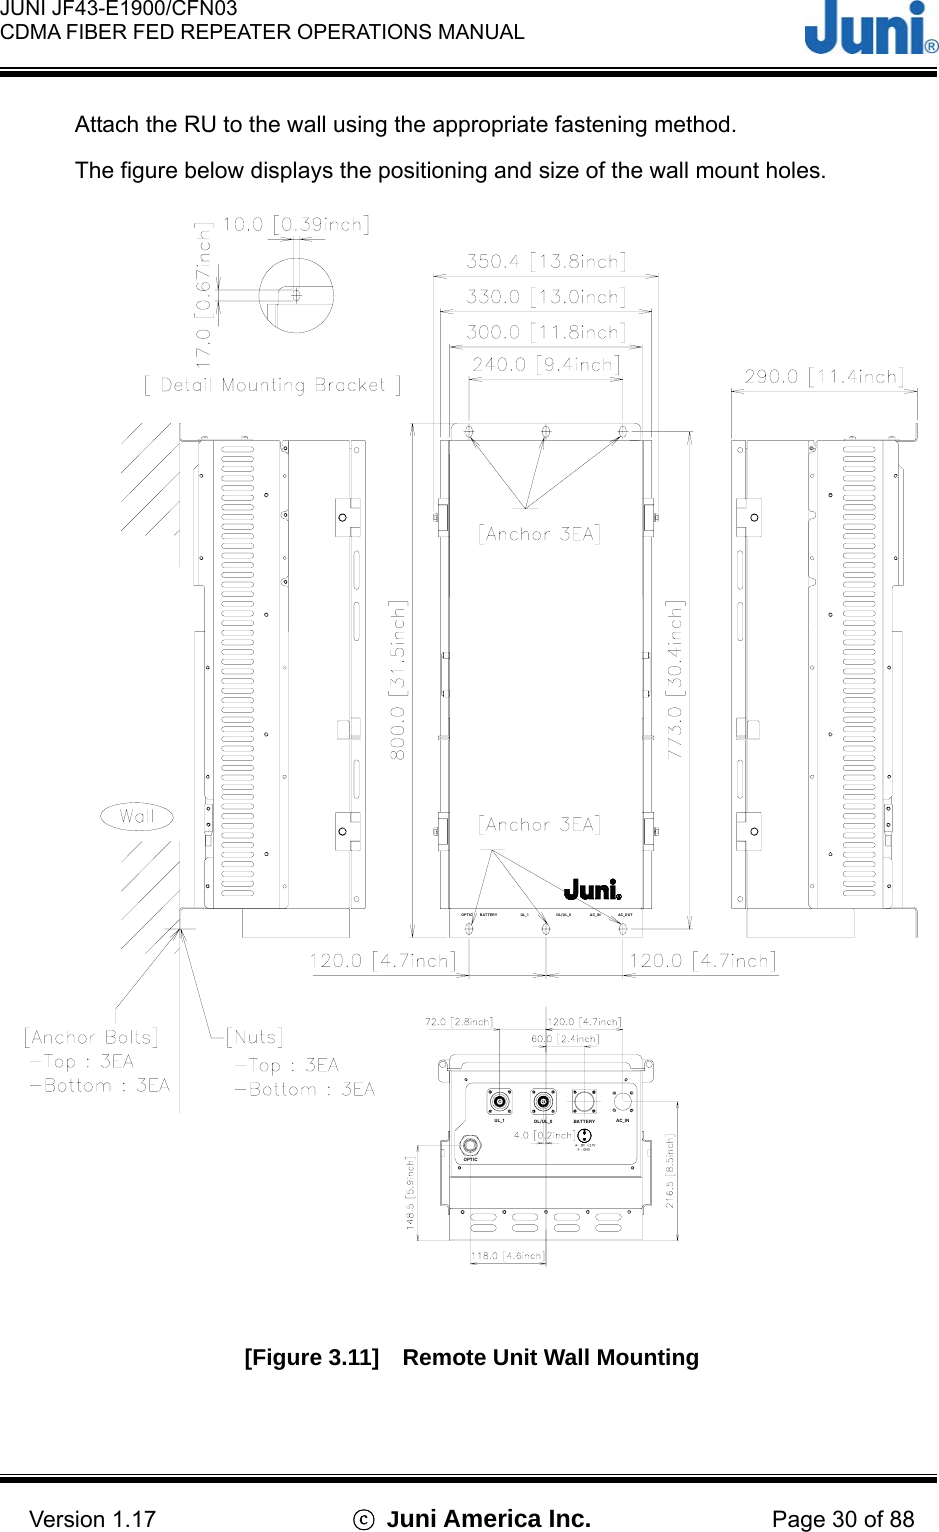  JUNI JF43-E1900/CFN03 CDMA FIBER FED REPEATER OPERATIONS MANUAL                                    Version 1.17  ⓒ Juni America Inc. Page 30 of 88 Attach the RU to the wall using the appropriate fastening method. The figure below displays the positioning and size of the wall mount holes. DL/UL_0OPTICUL_1 AC_INBATTERYBATTERYOPTIC UL_1 DL/ UL_0 AC_OUTAC_IN  [Figure 3.11]    Remote Unit Wall Mounting 